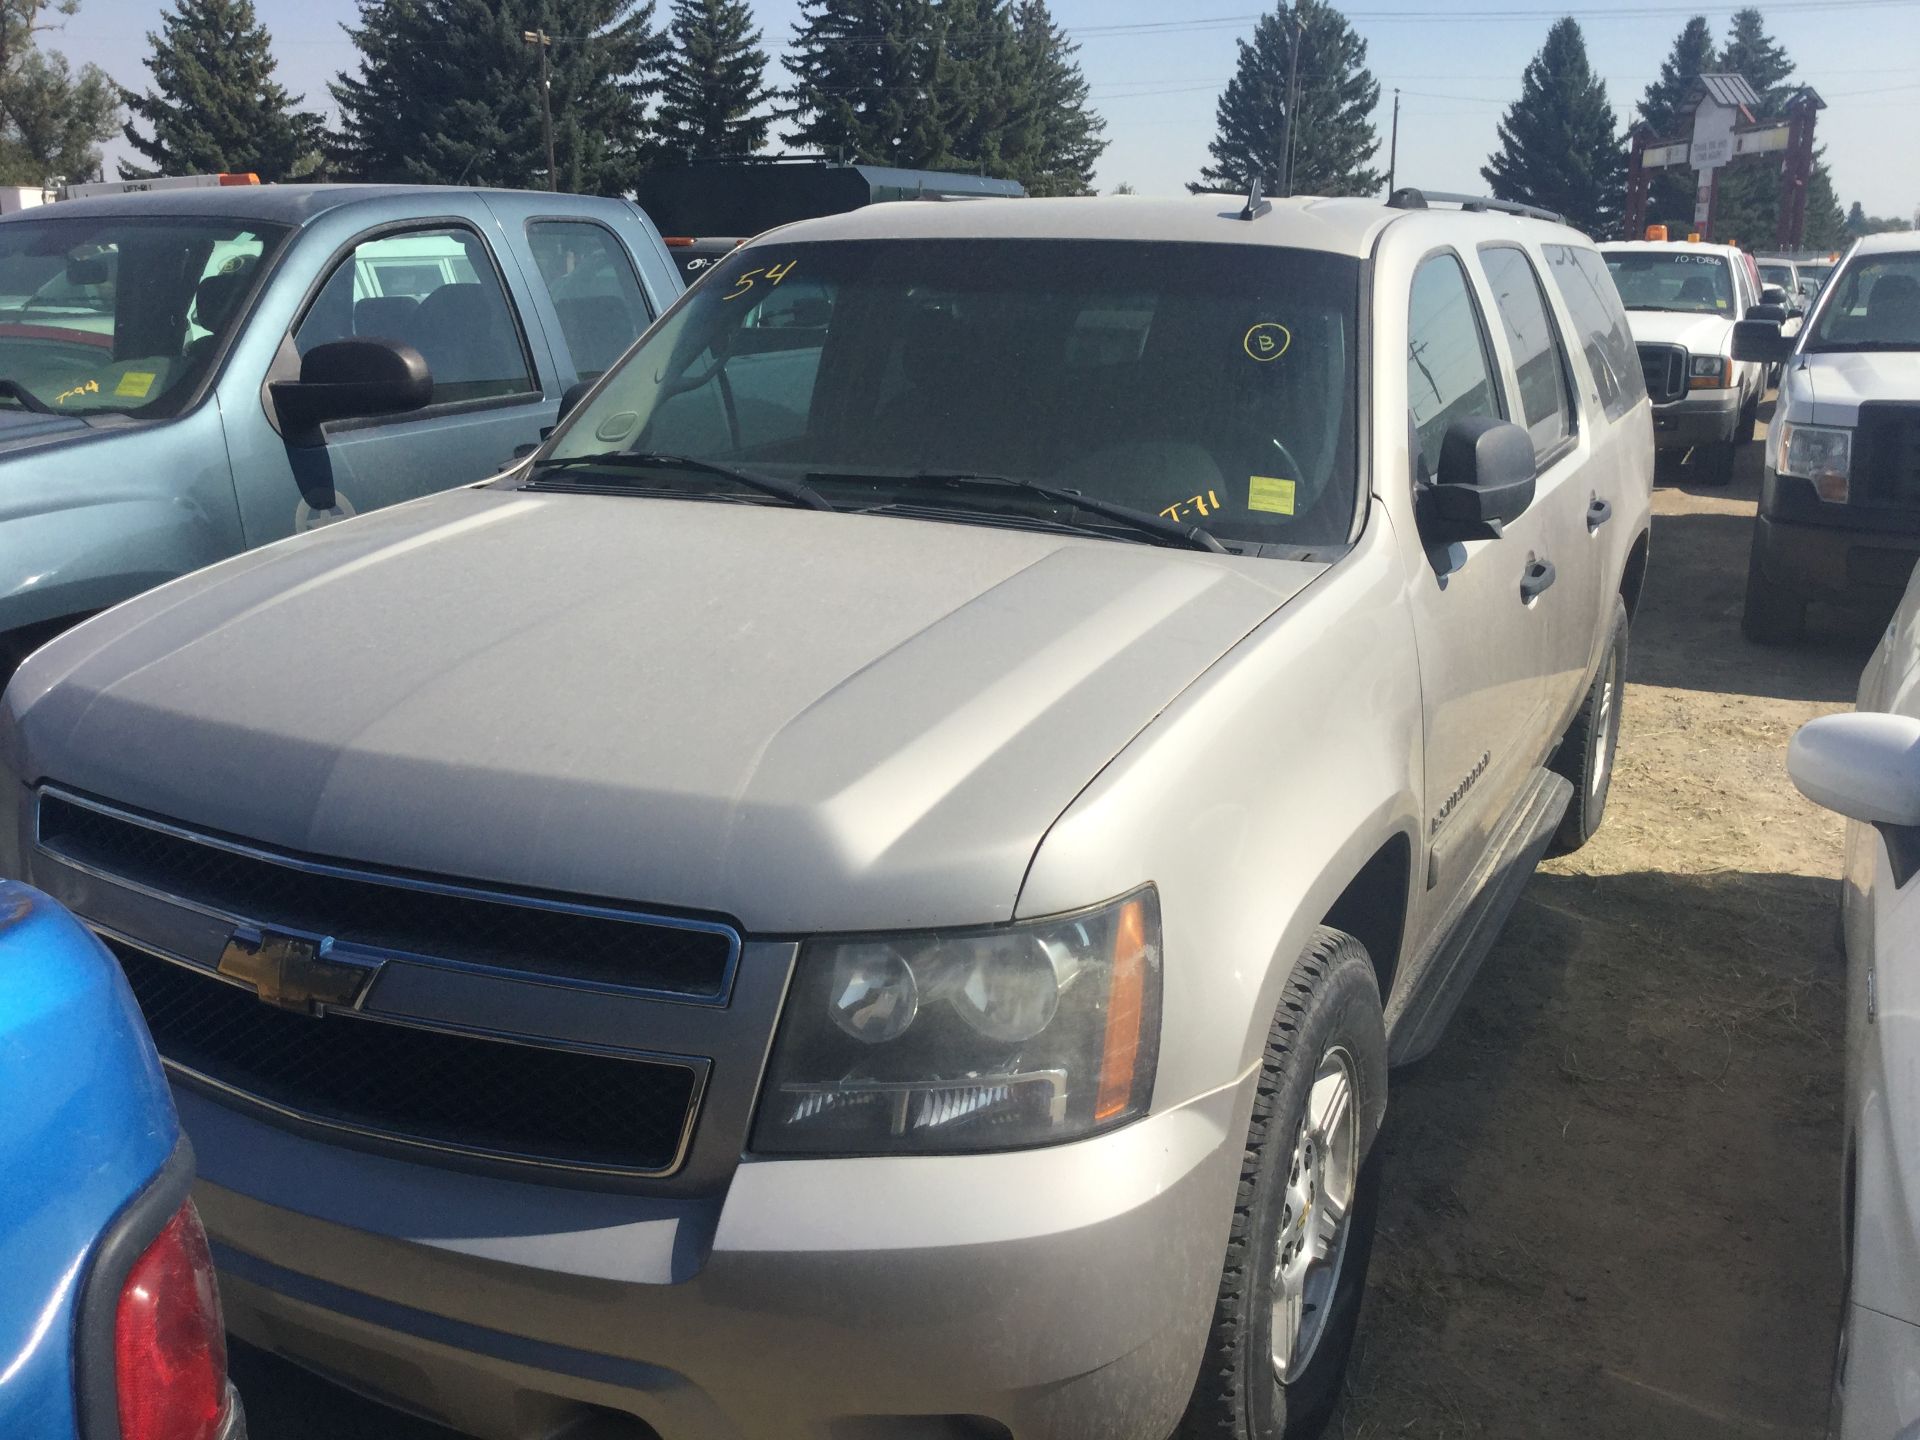 Year: 2007 Make: Chevy Model: Suburban Type: SUV Vin#: 230757 Mileage/Hours: 132500 5.3L, 2WD, auto,